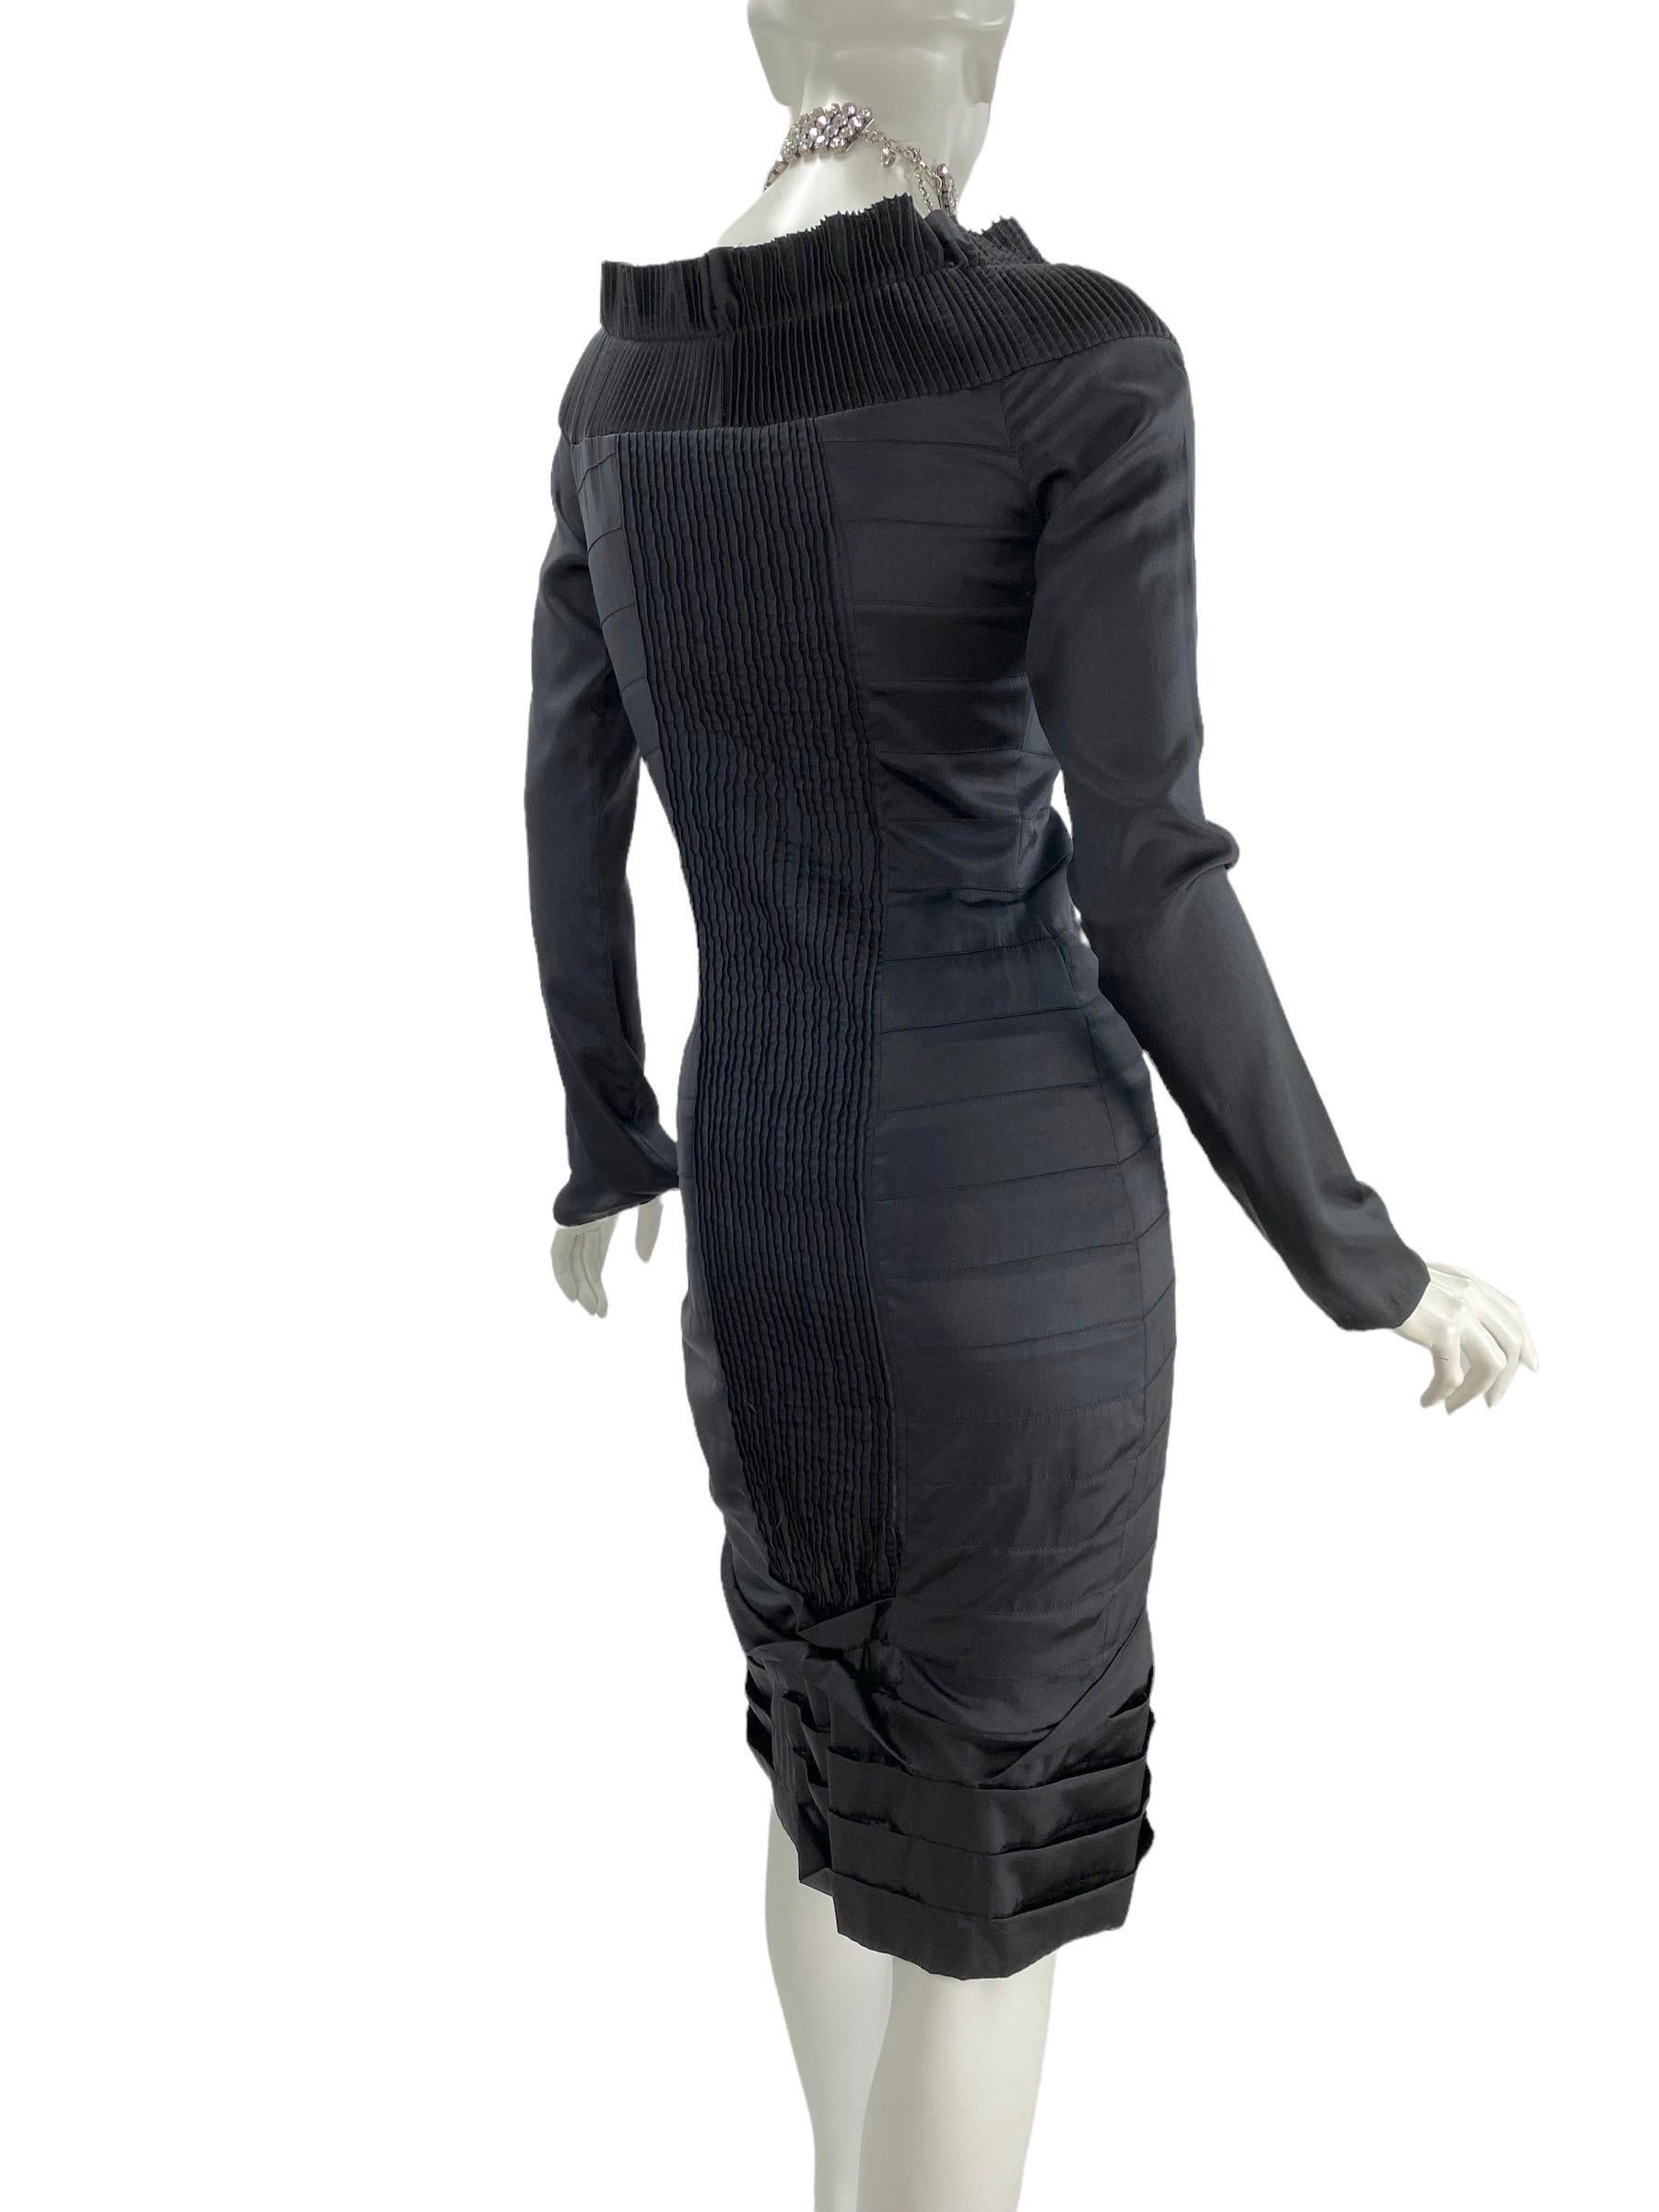 Gucci by Tom Ford F/W 2004 AD Runway Silk Black Plisse Cocktail Belted Dress 40 In Excellent Condition For Sale In Montgomery, TX